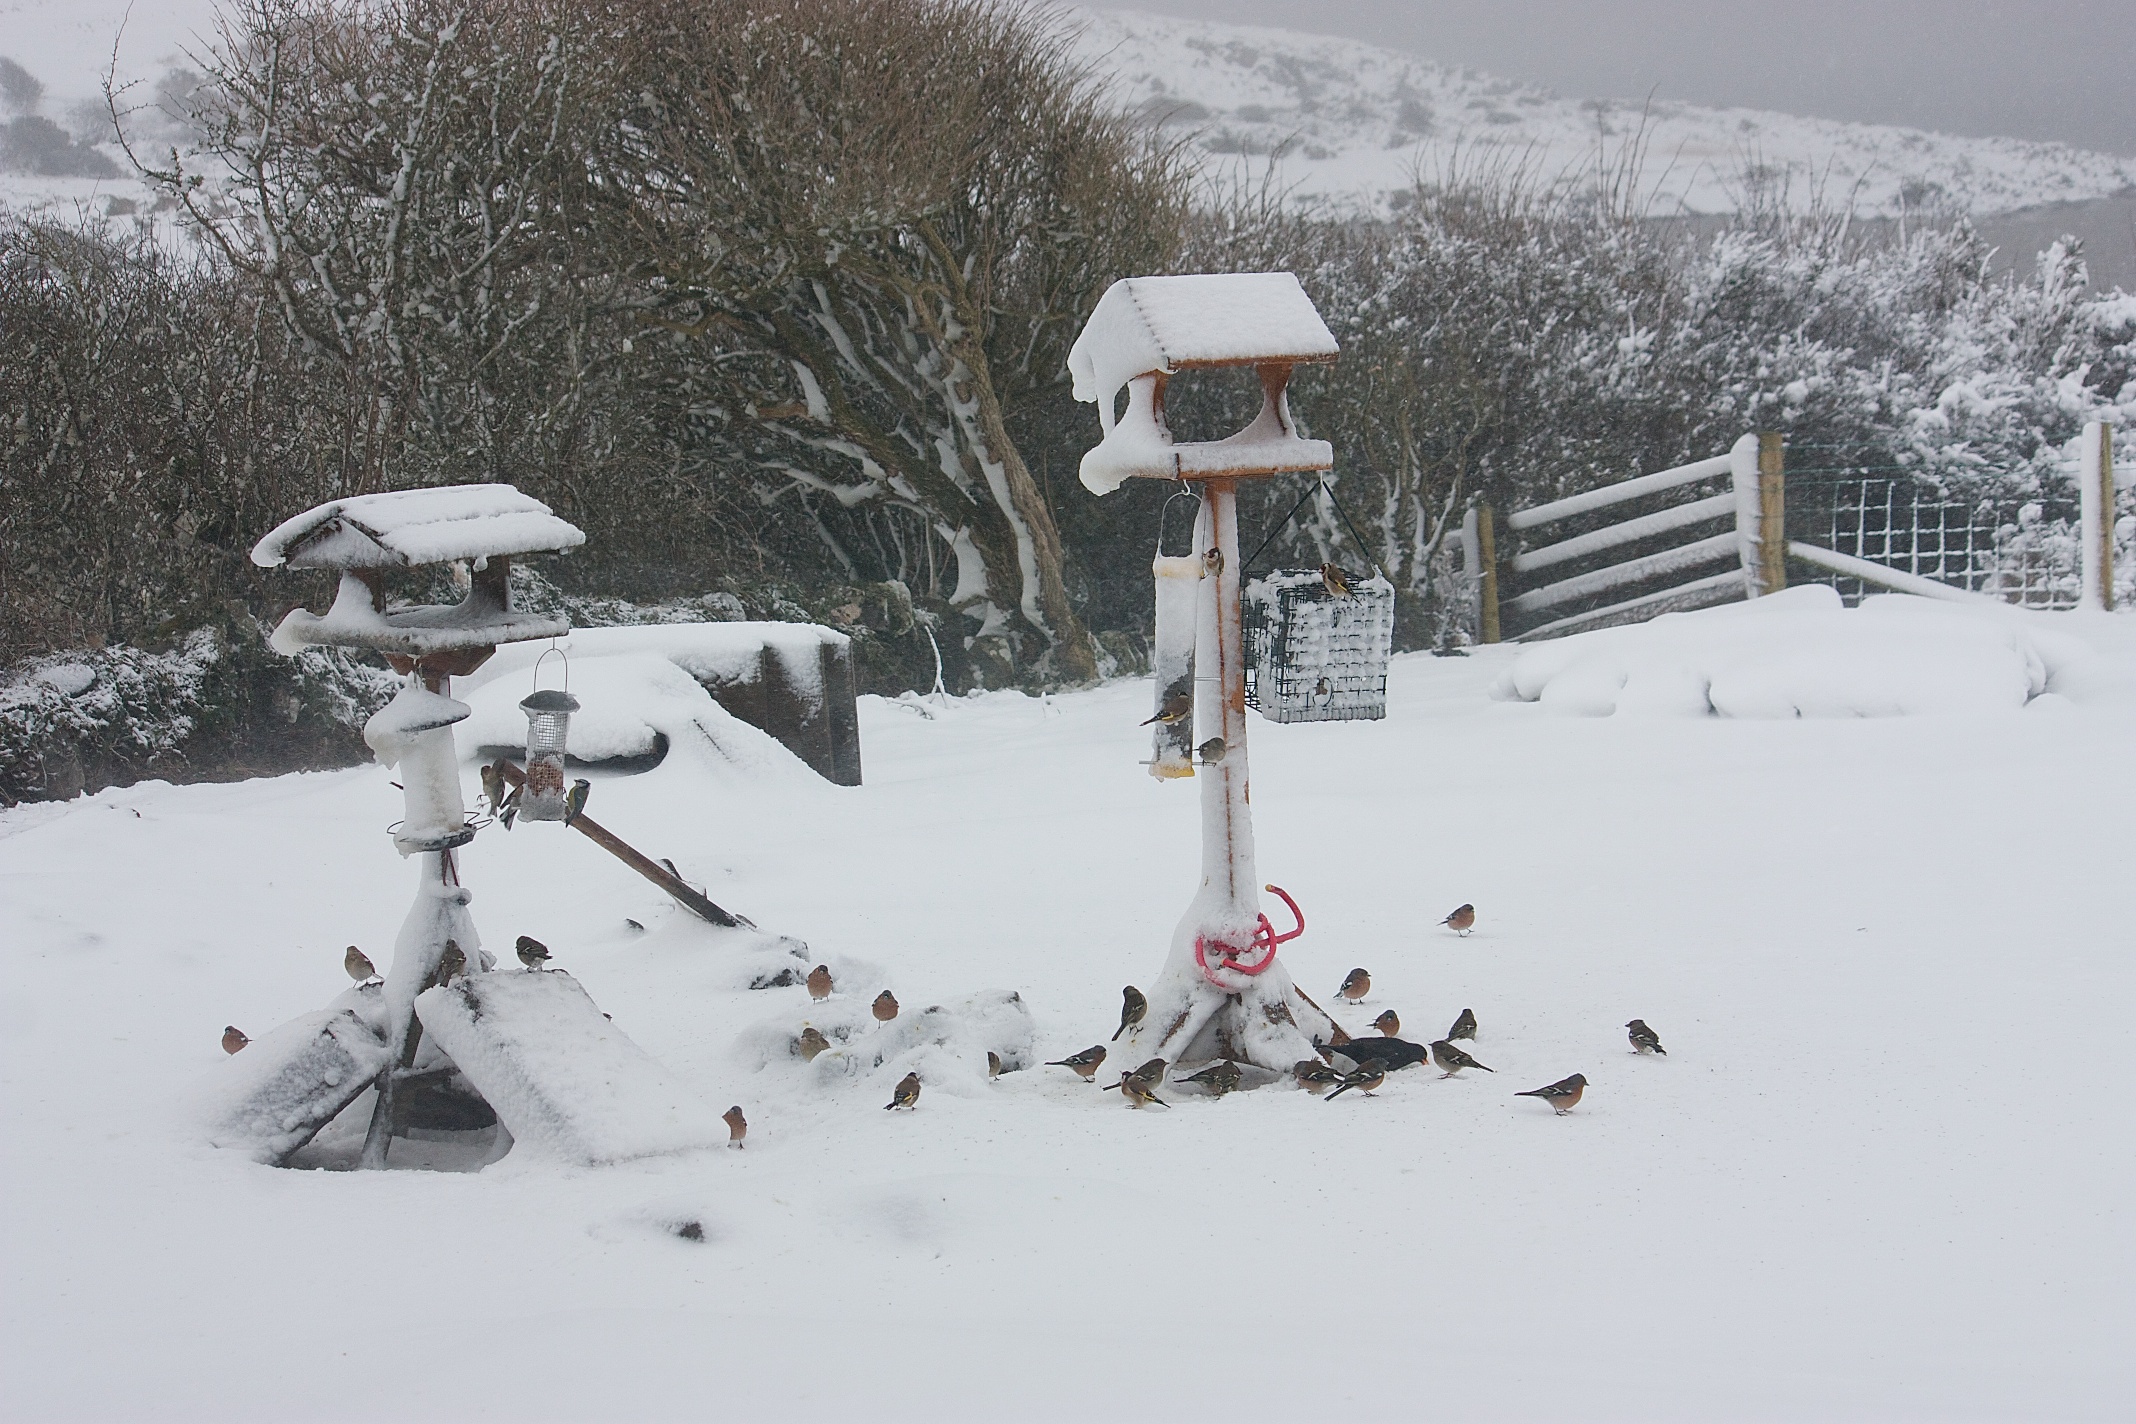 Activity at the bird tables